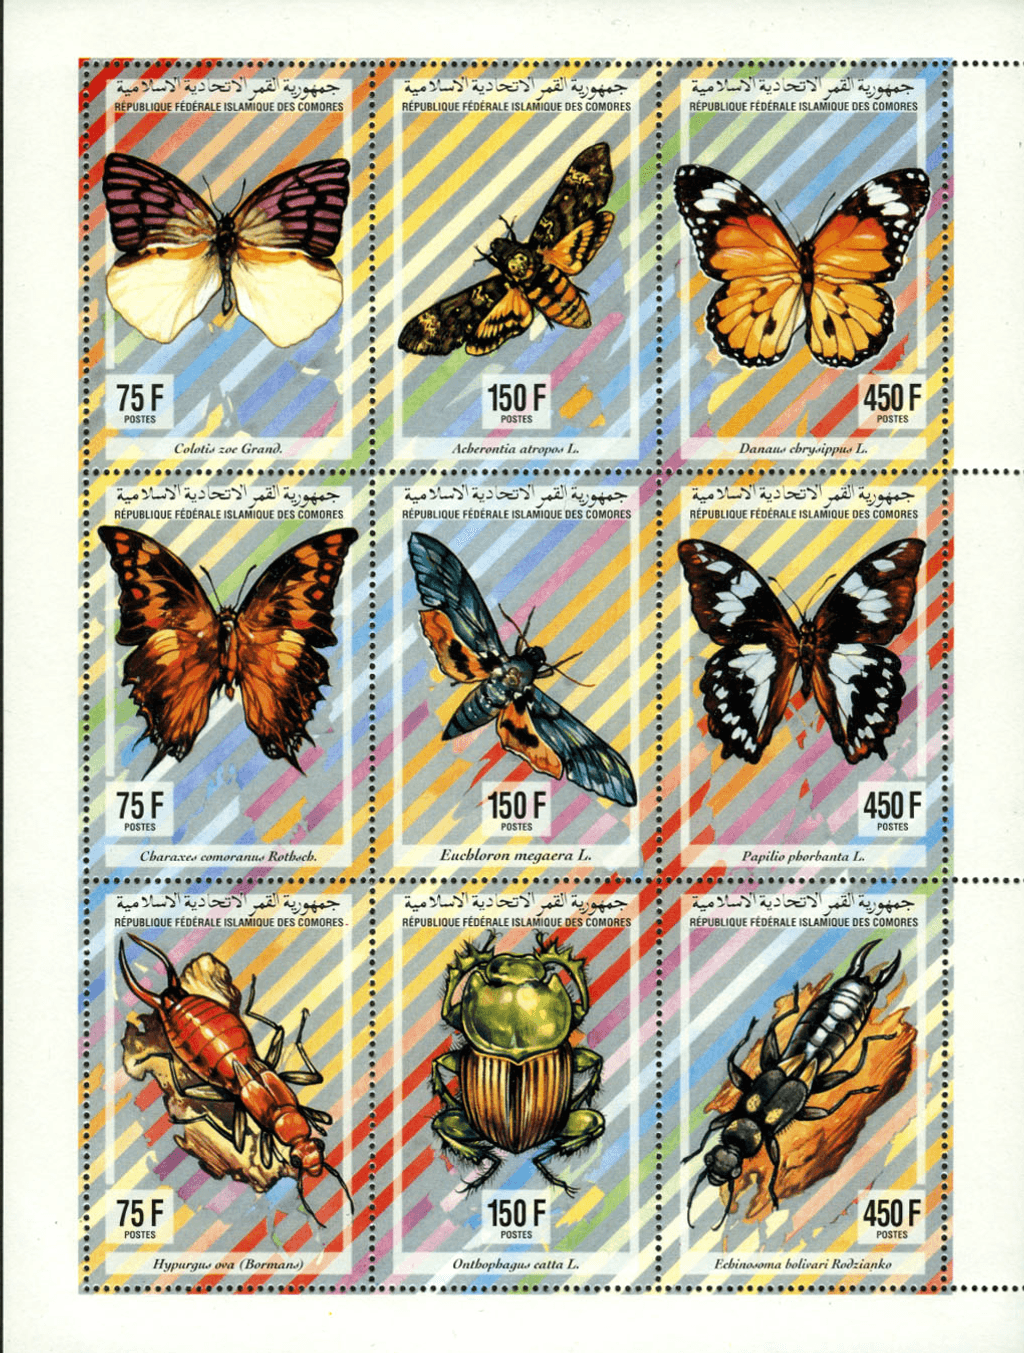 Butterflies / Insects (5624)